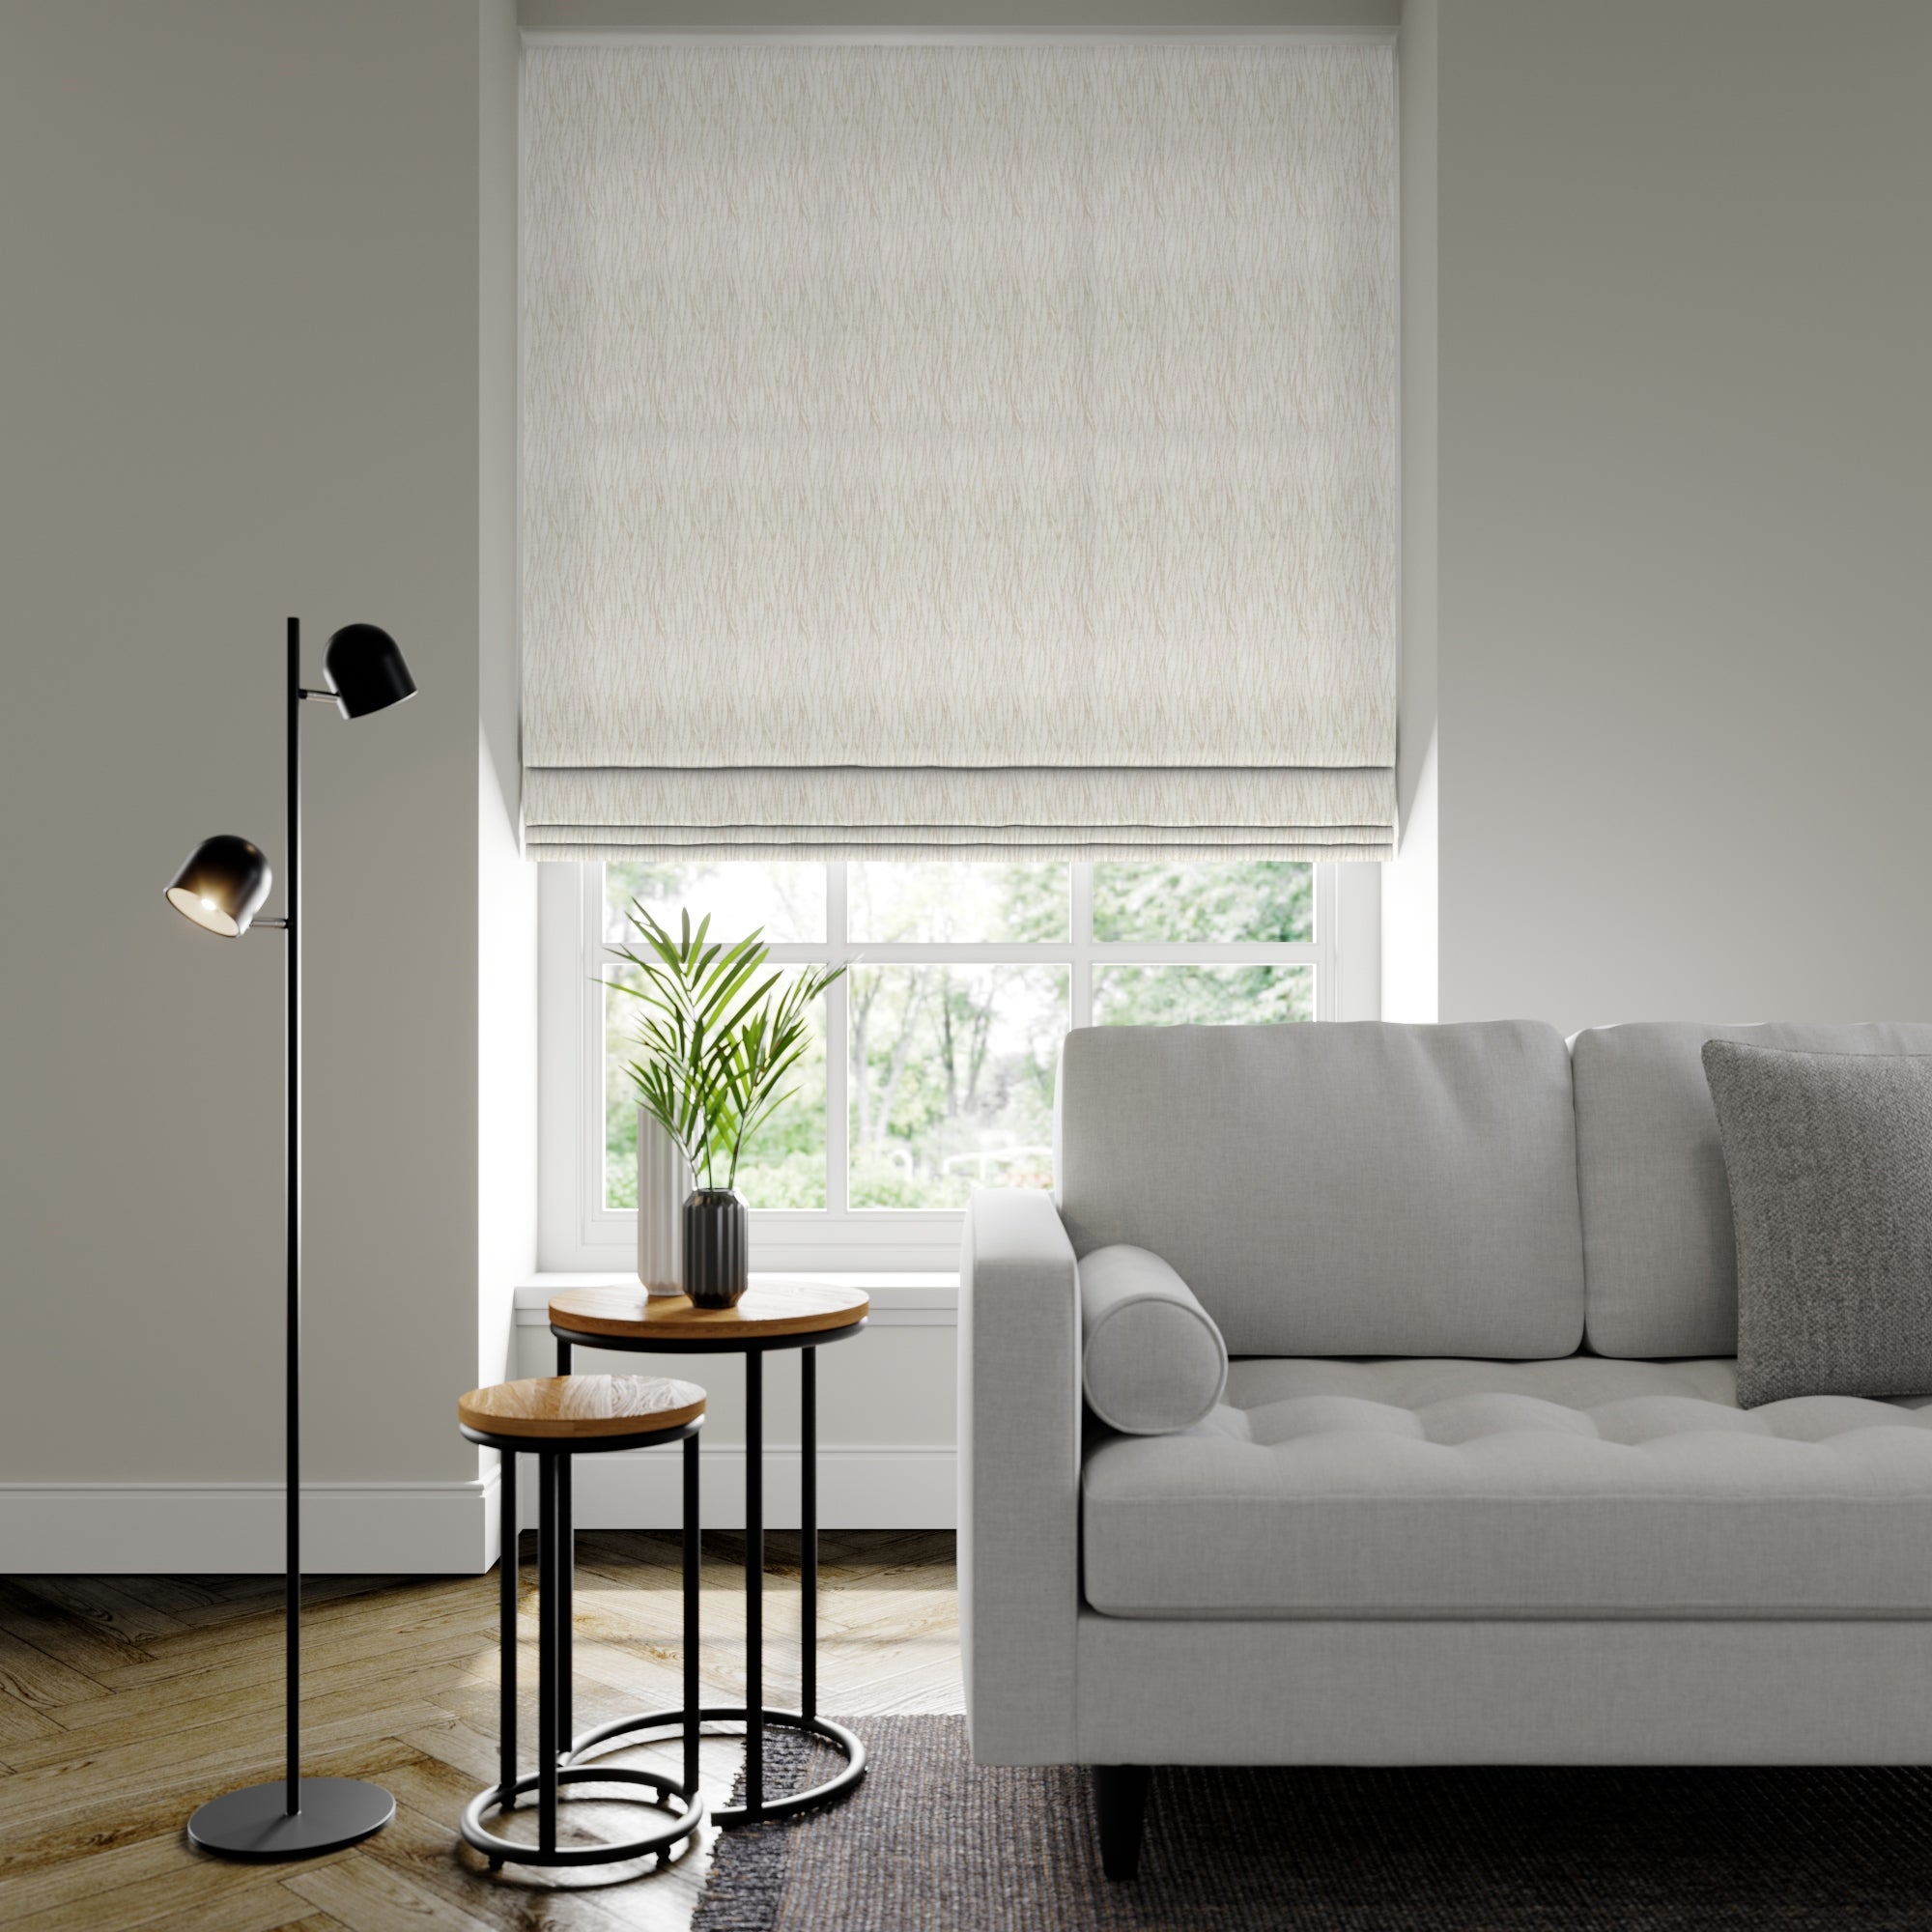 Linear Made to Measure Roman Blind Linear Natural